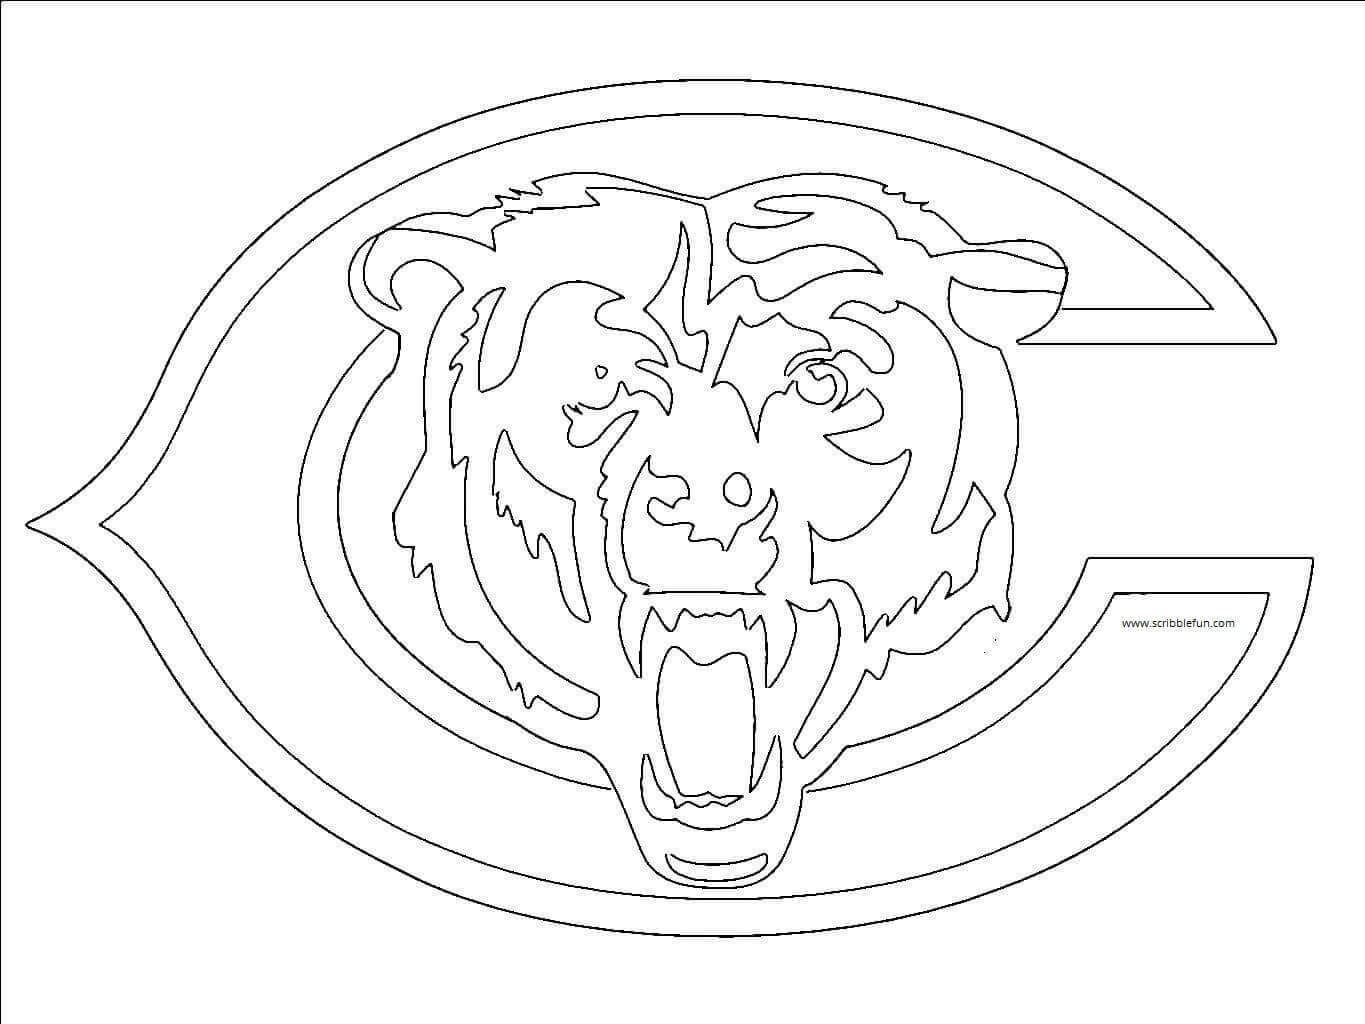 Chicago Bears Coloring Page